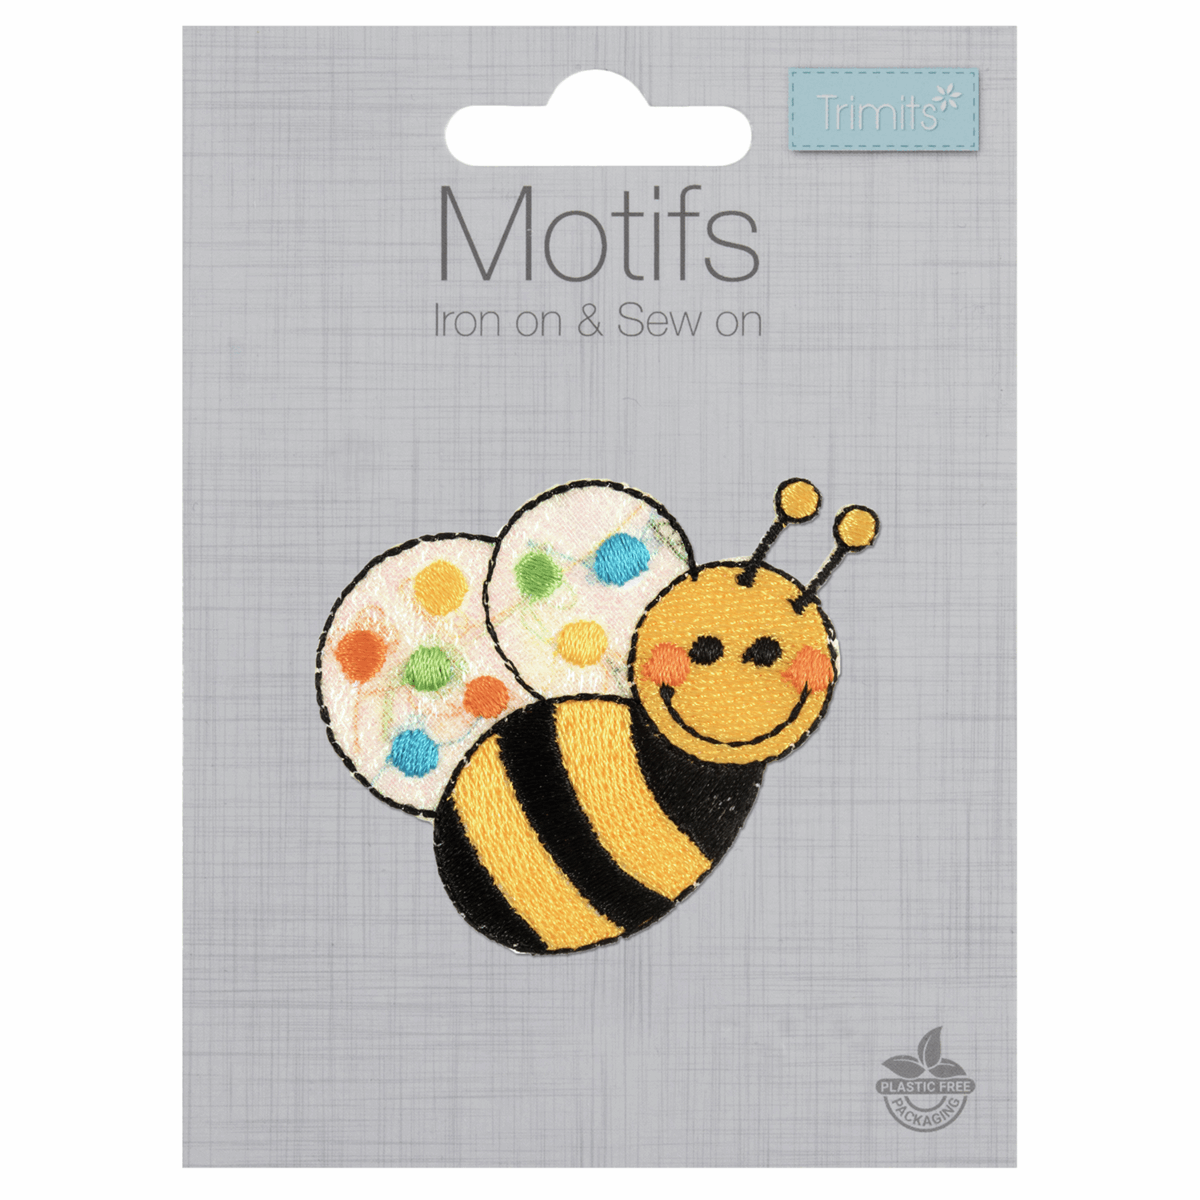 Iron-On/Sew On Motif Patch - Bumble Bee